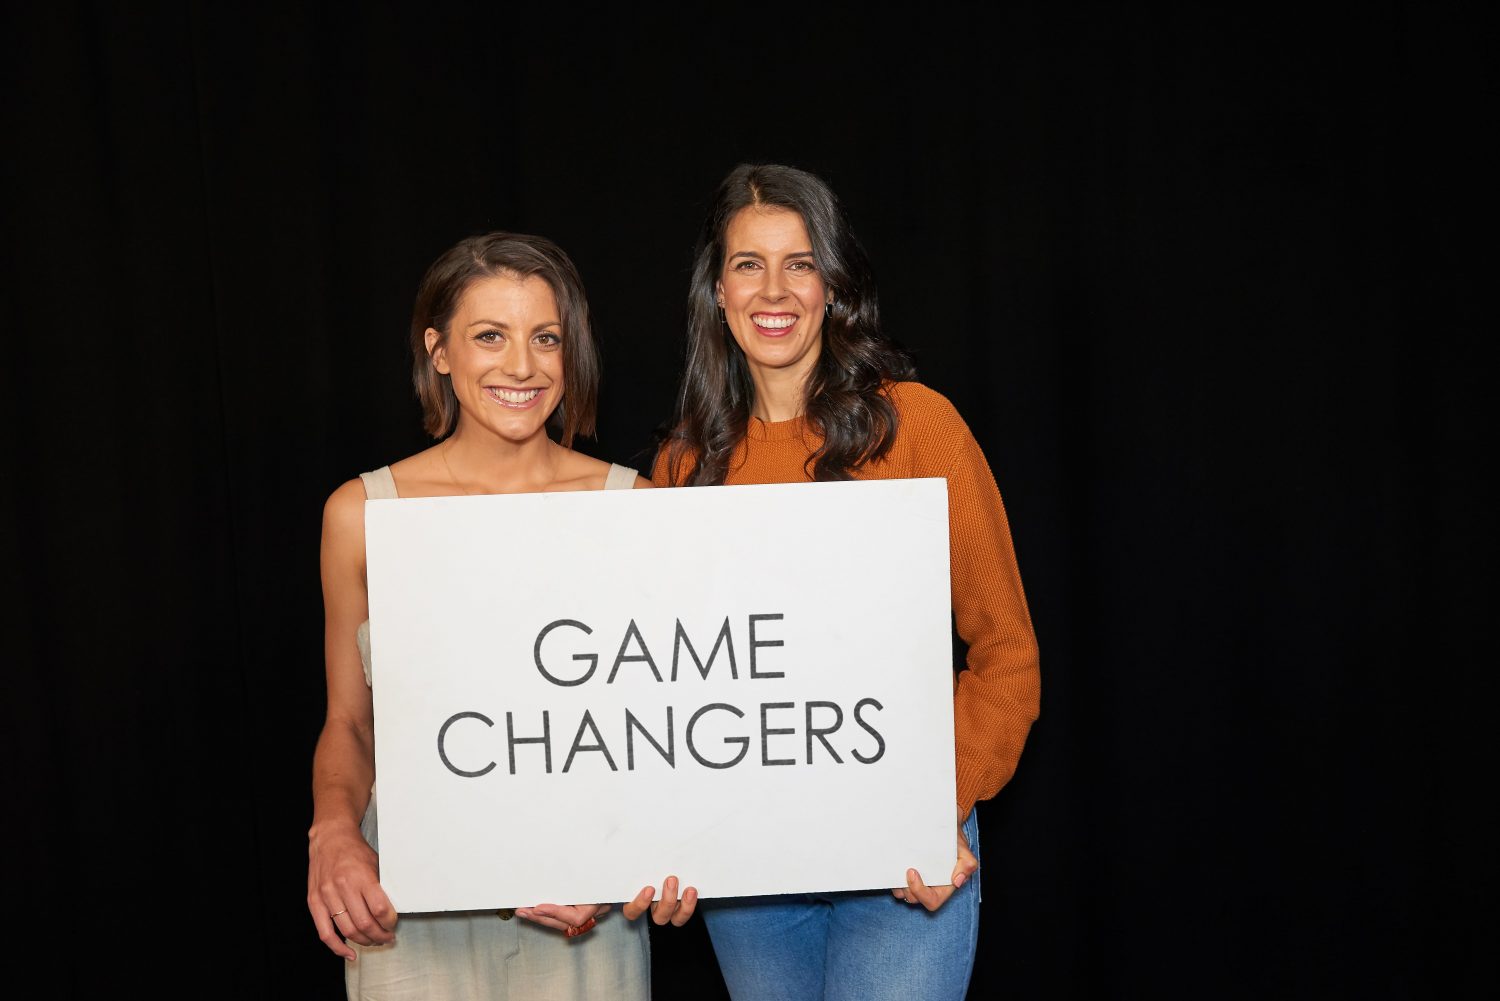 Charlie Thompson And Georgia Lawson, The Clean Collective co-founders